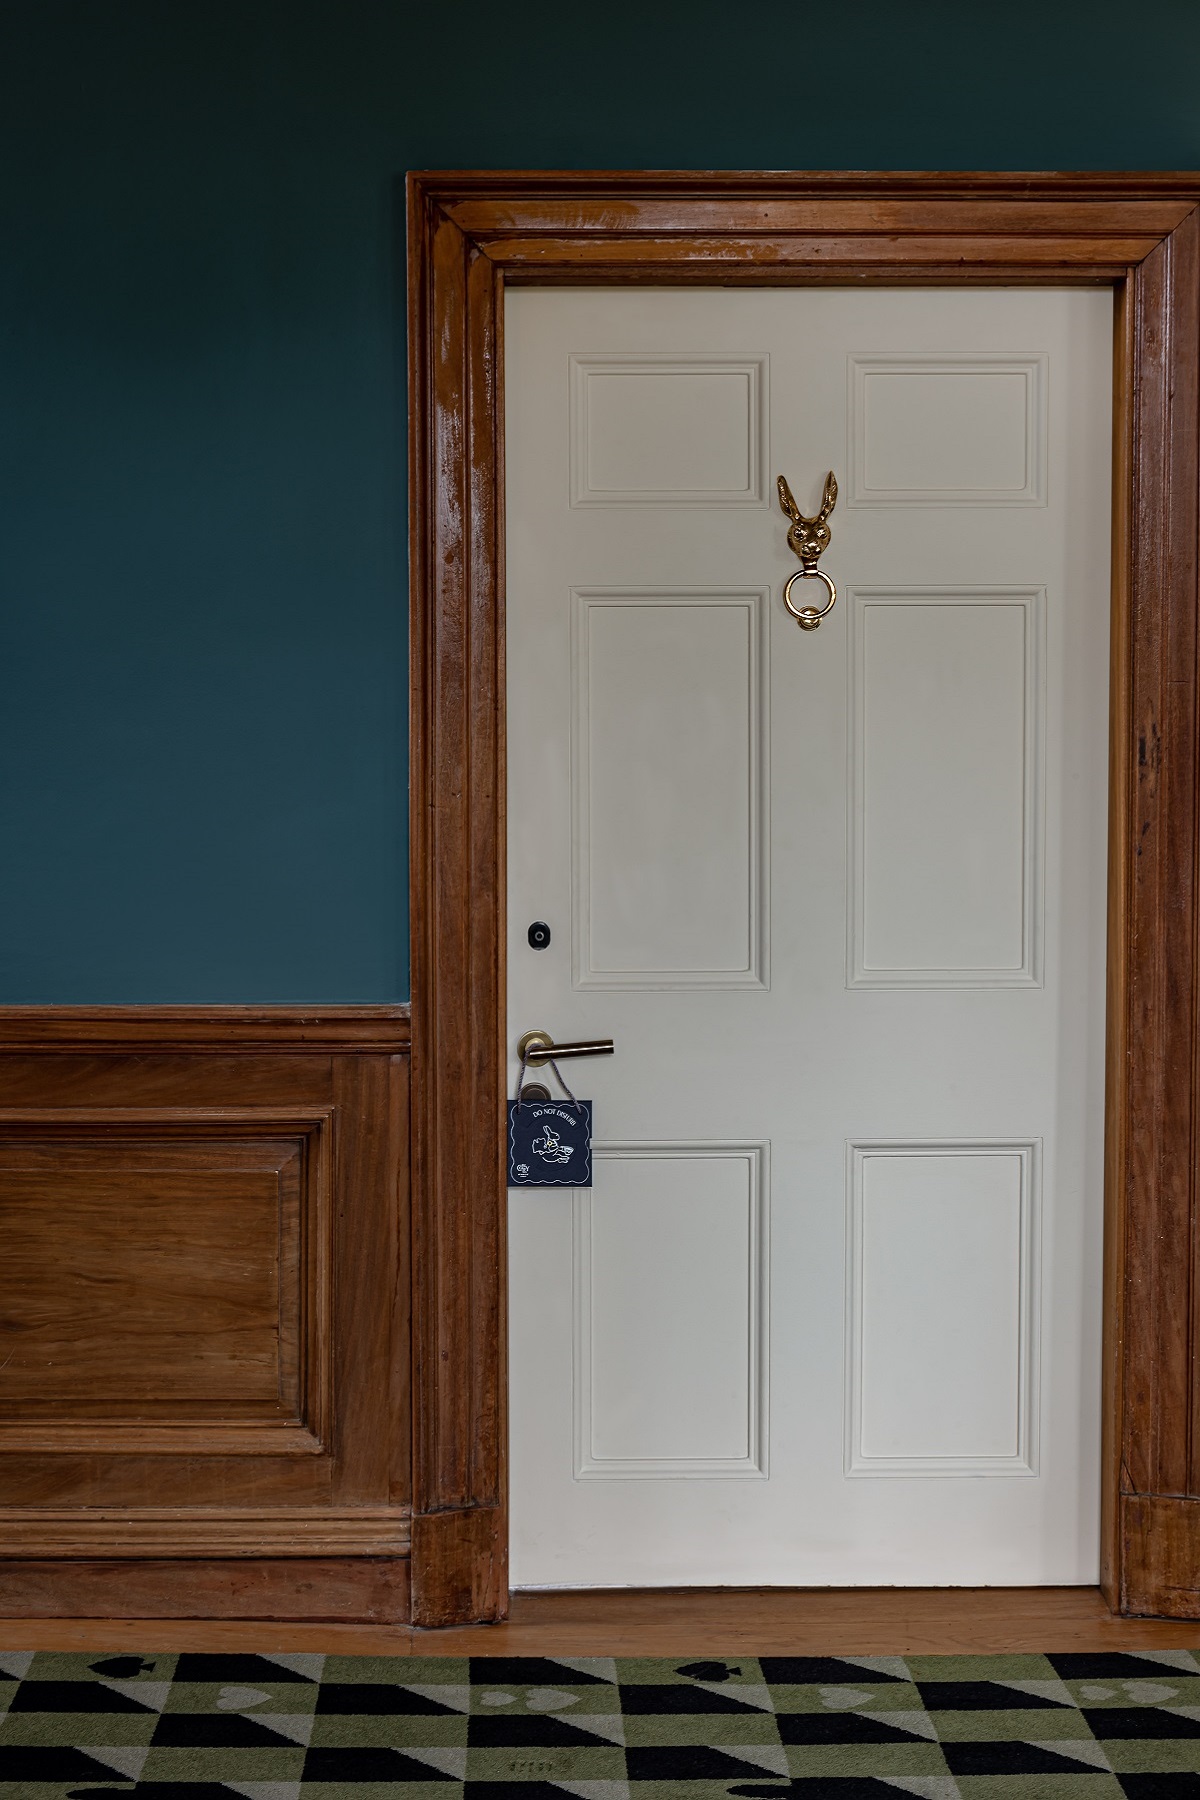 white guestroom door with a rabbit knocker and wood surround set in a blue wall